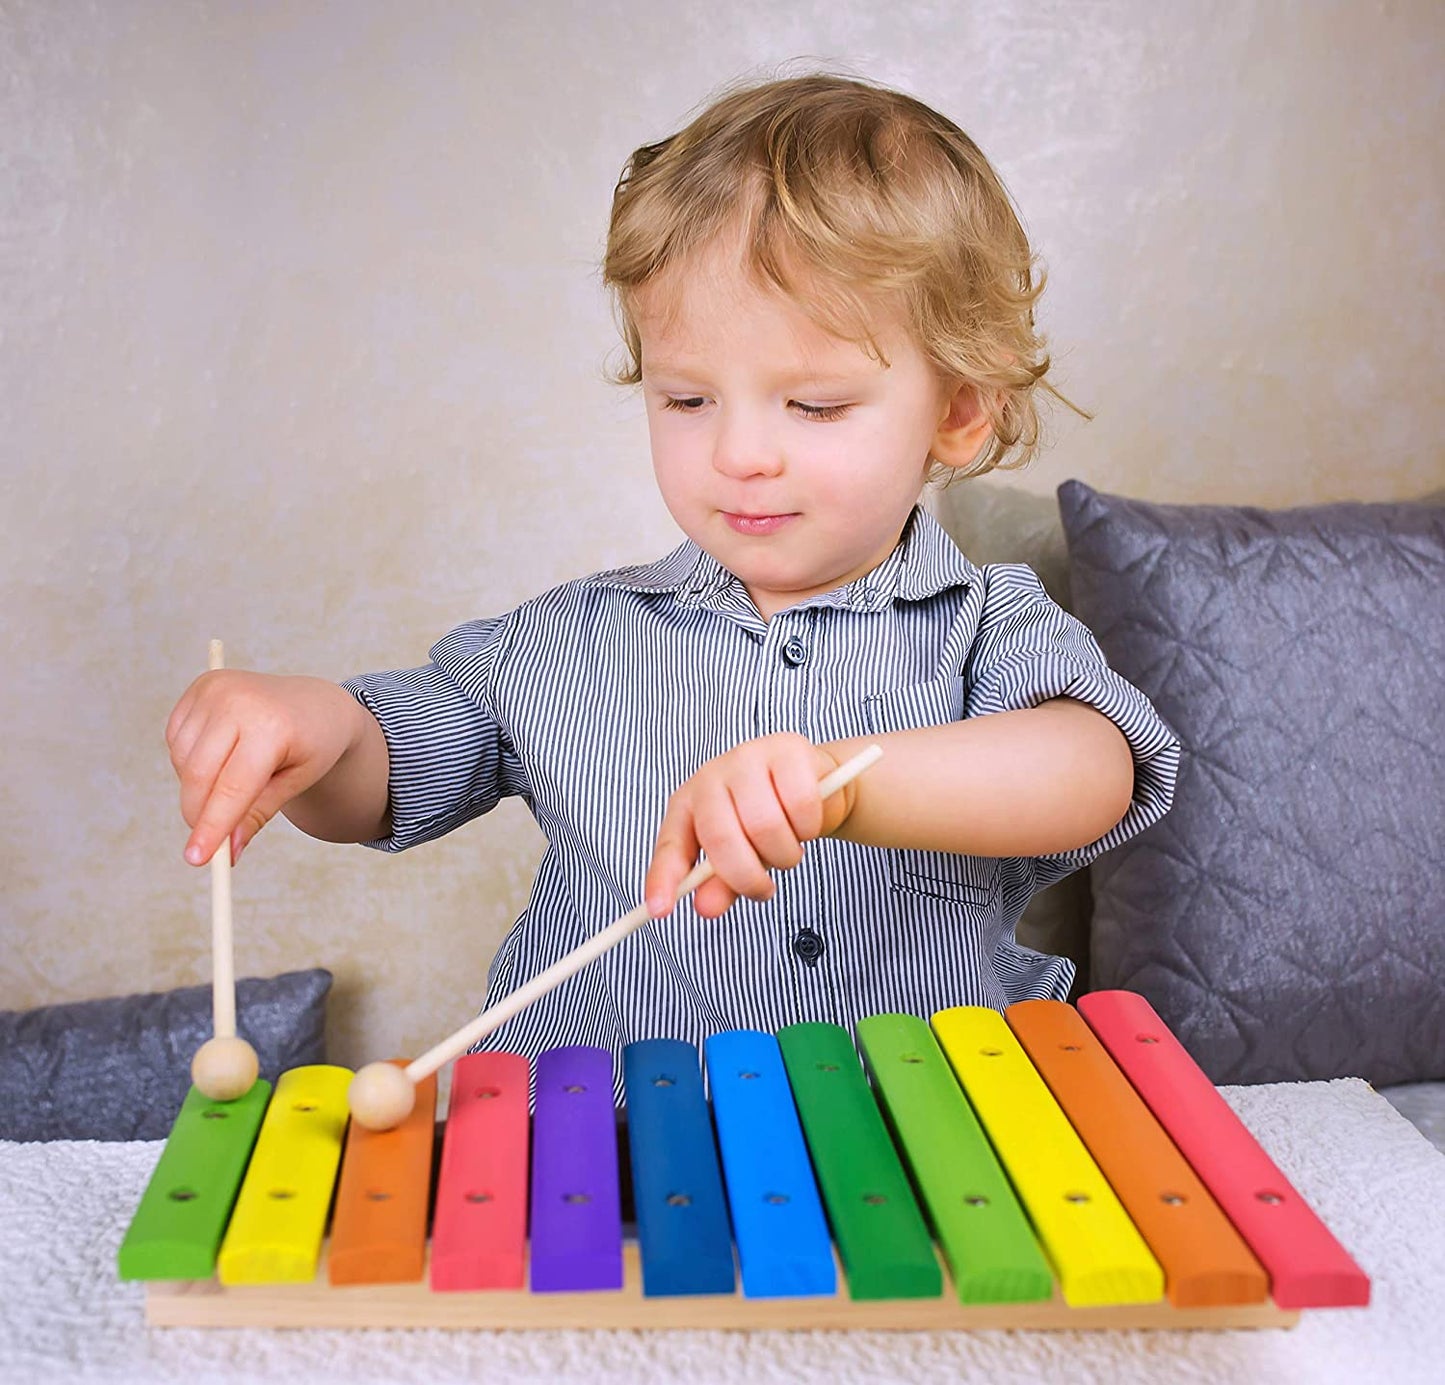 Wooden Rainbow Xylophone with 12 Tones and 2 Playing Clappers